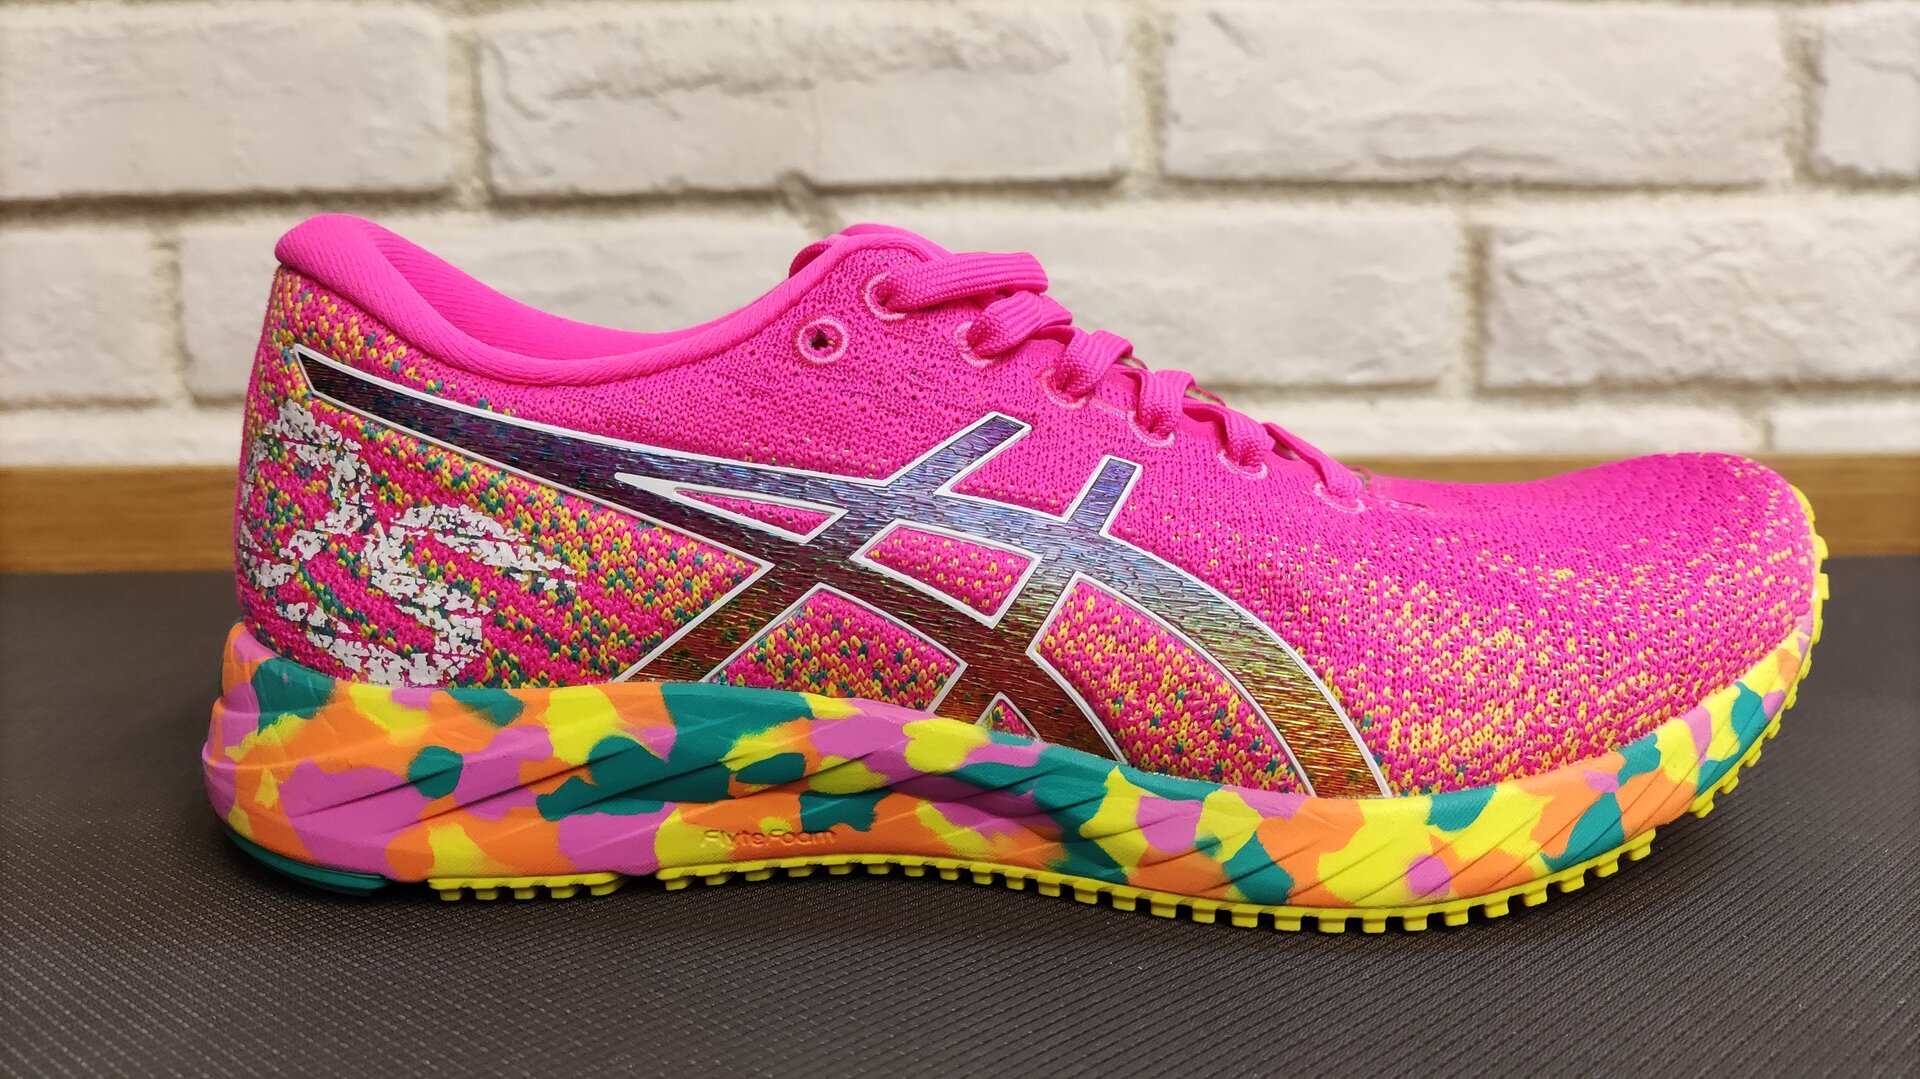 ASICS Gel DS Trainer 26, review y opiniones, Desde 42,00 €